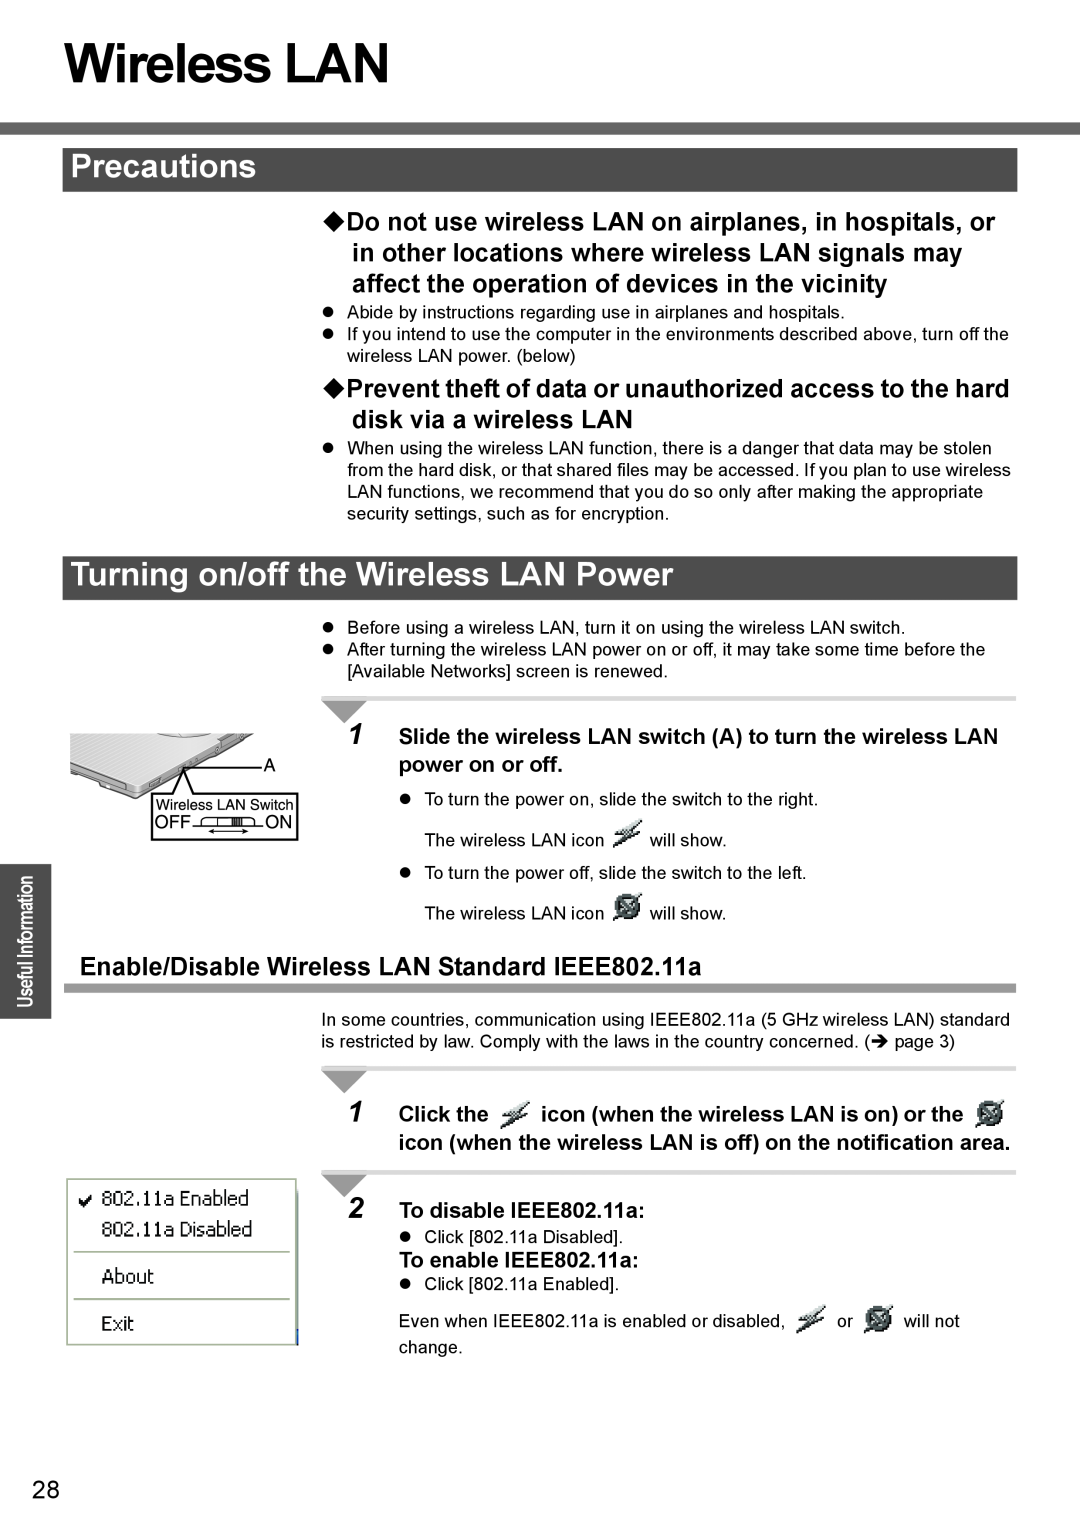 Panasonic CF-T4 Turning on/off the Wireless LAN Power, ‹Do not use wireless LAN on airplanes, in hospitals, or 